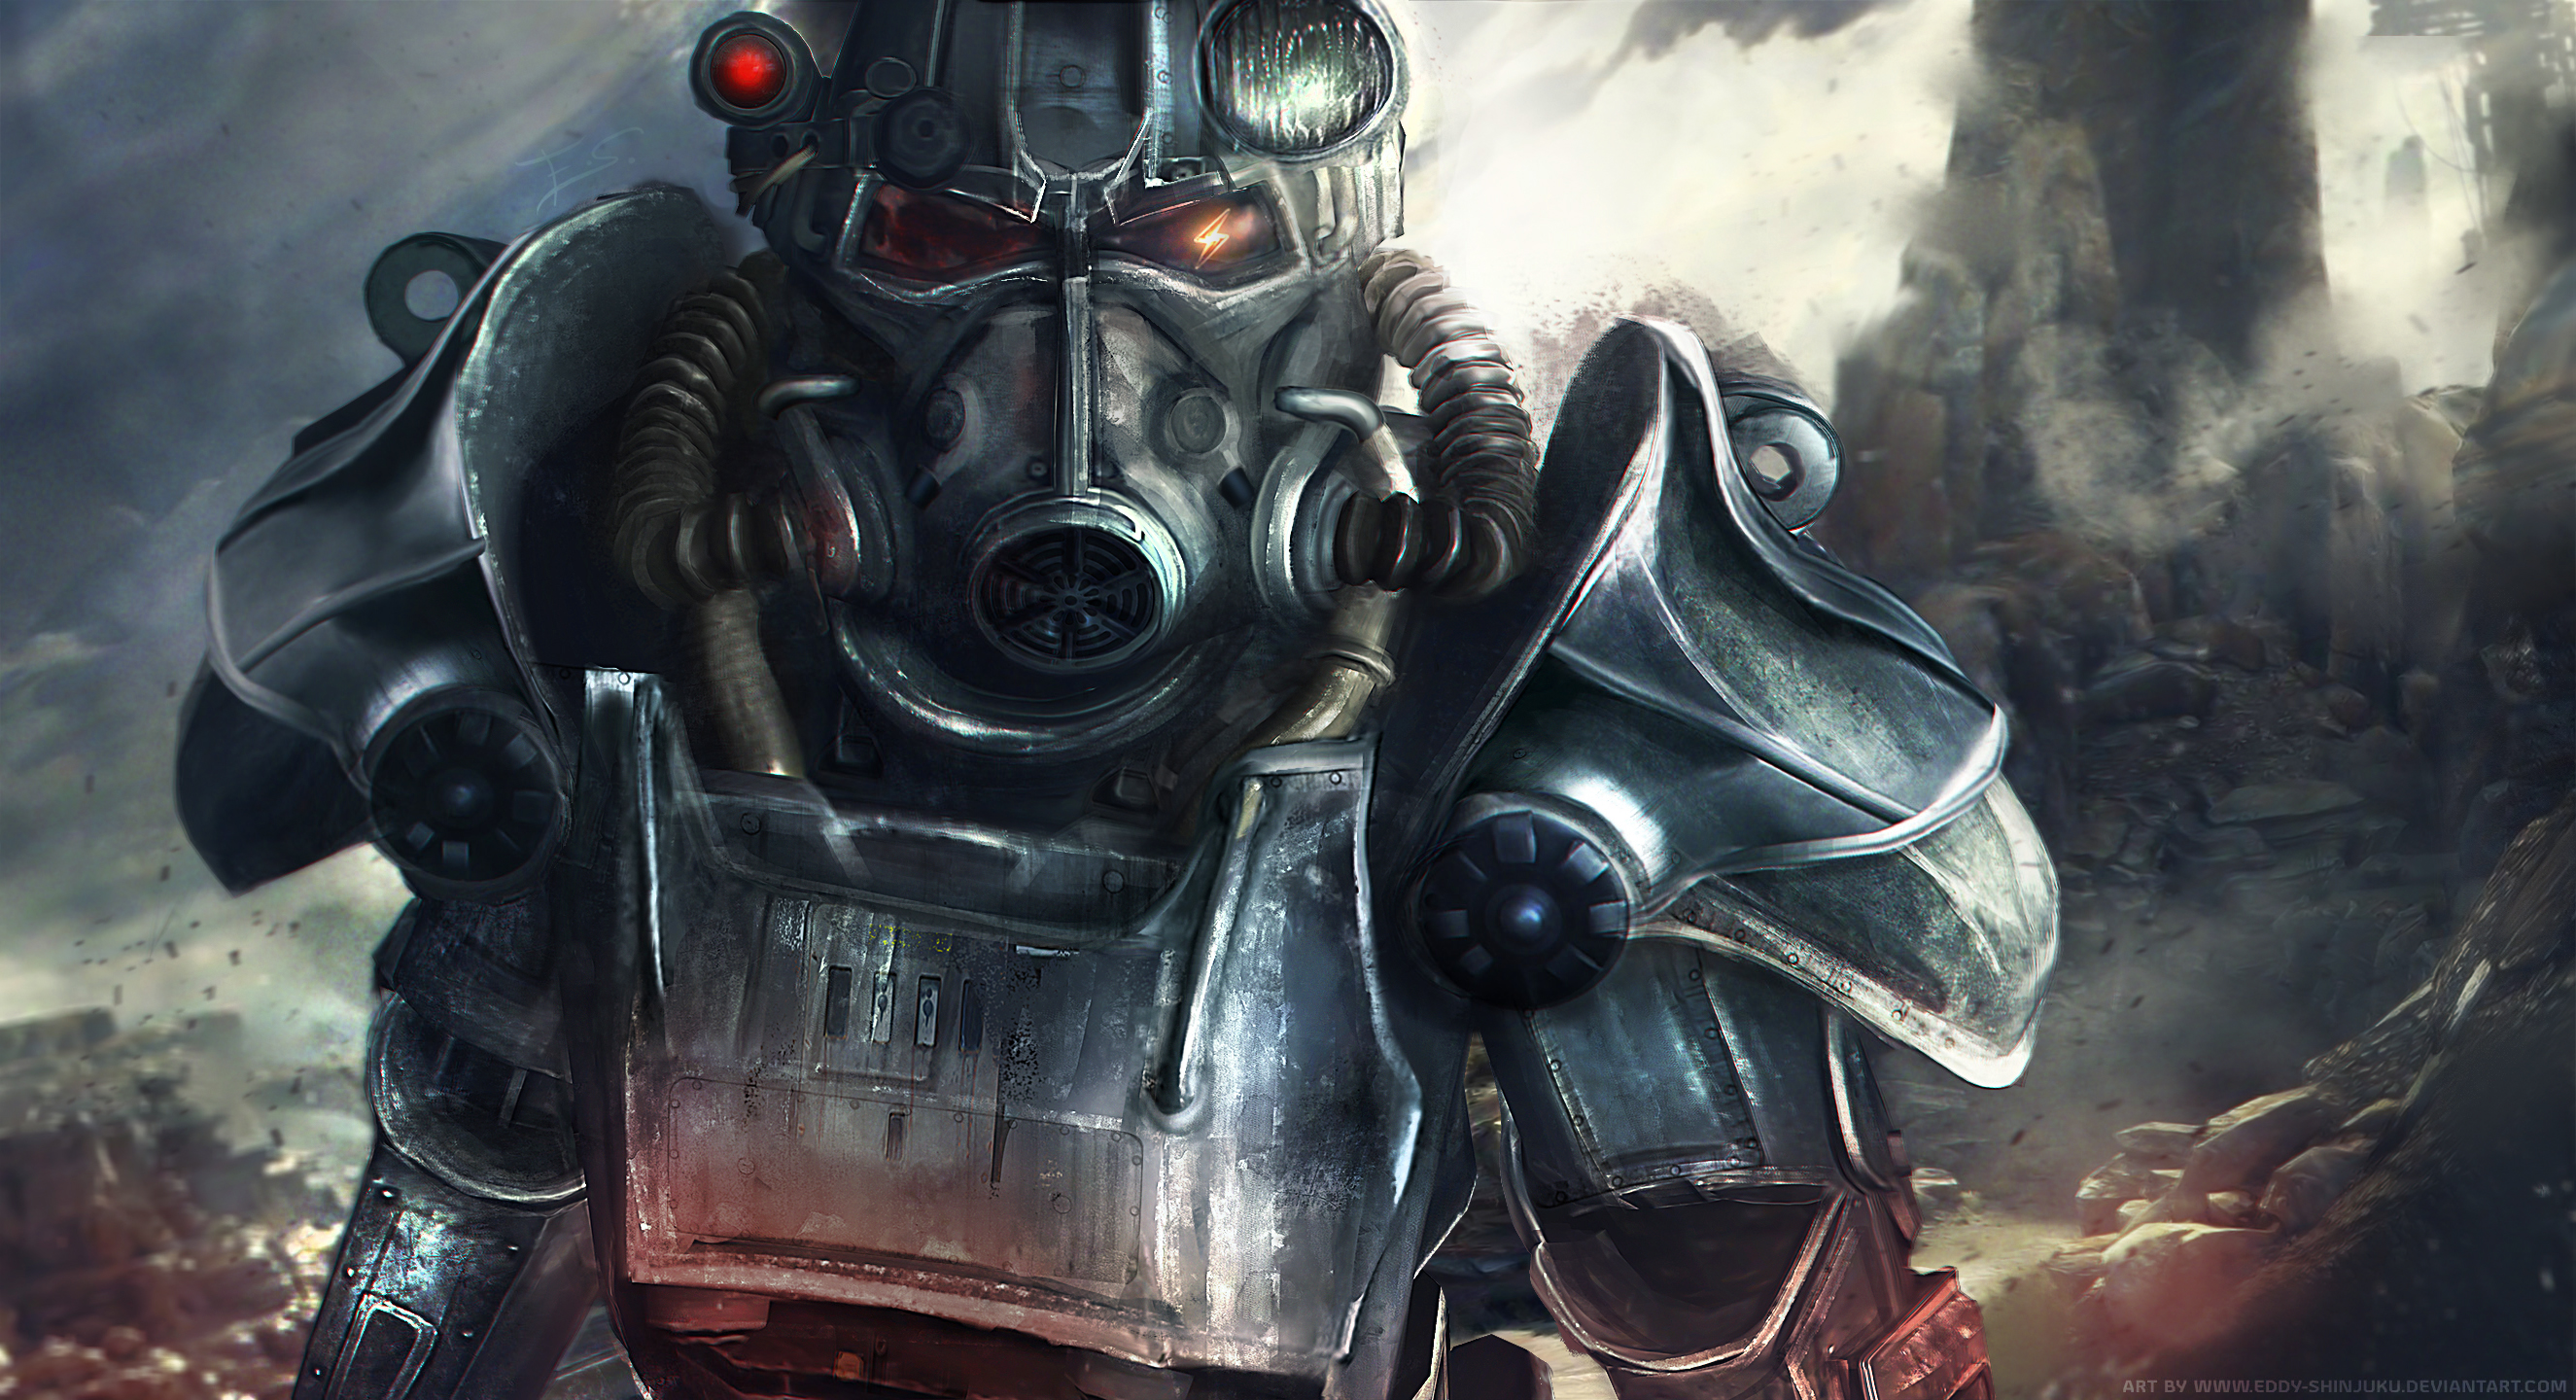 power armor (fallout), fallout, video game, fallout 4